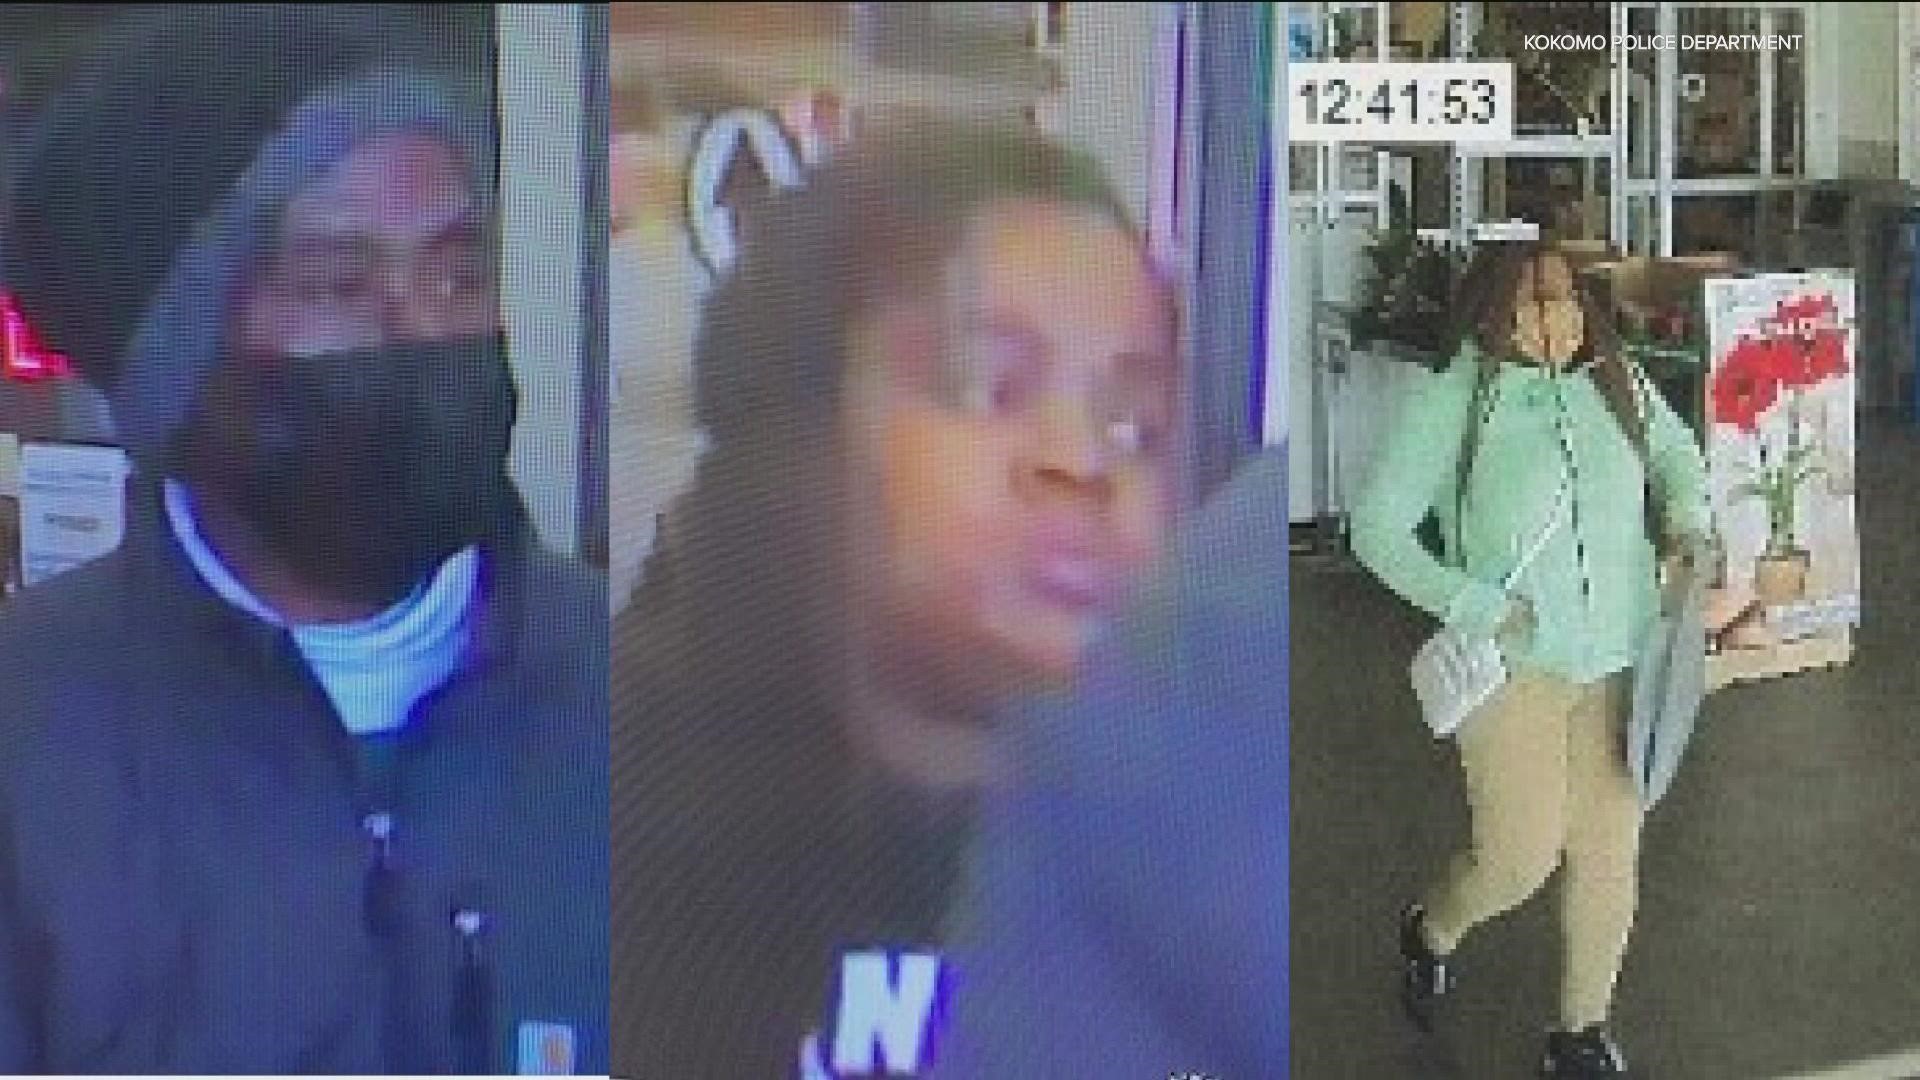 Police shared surveillance images of people they suspect were involved in the Black Friday thefts.